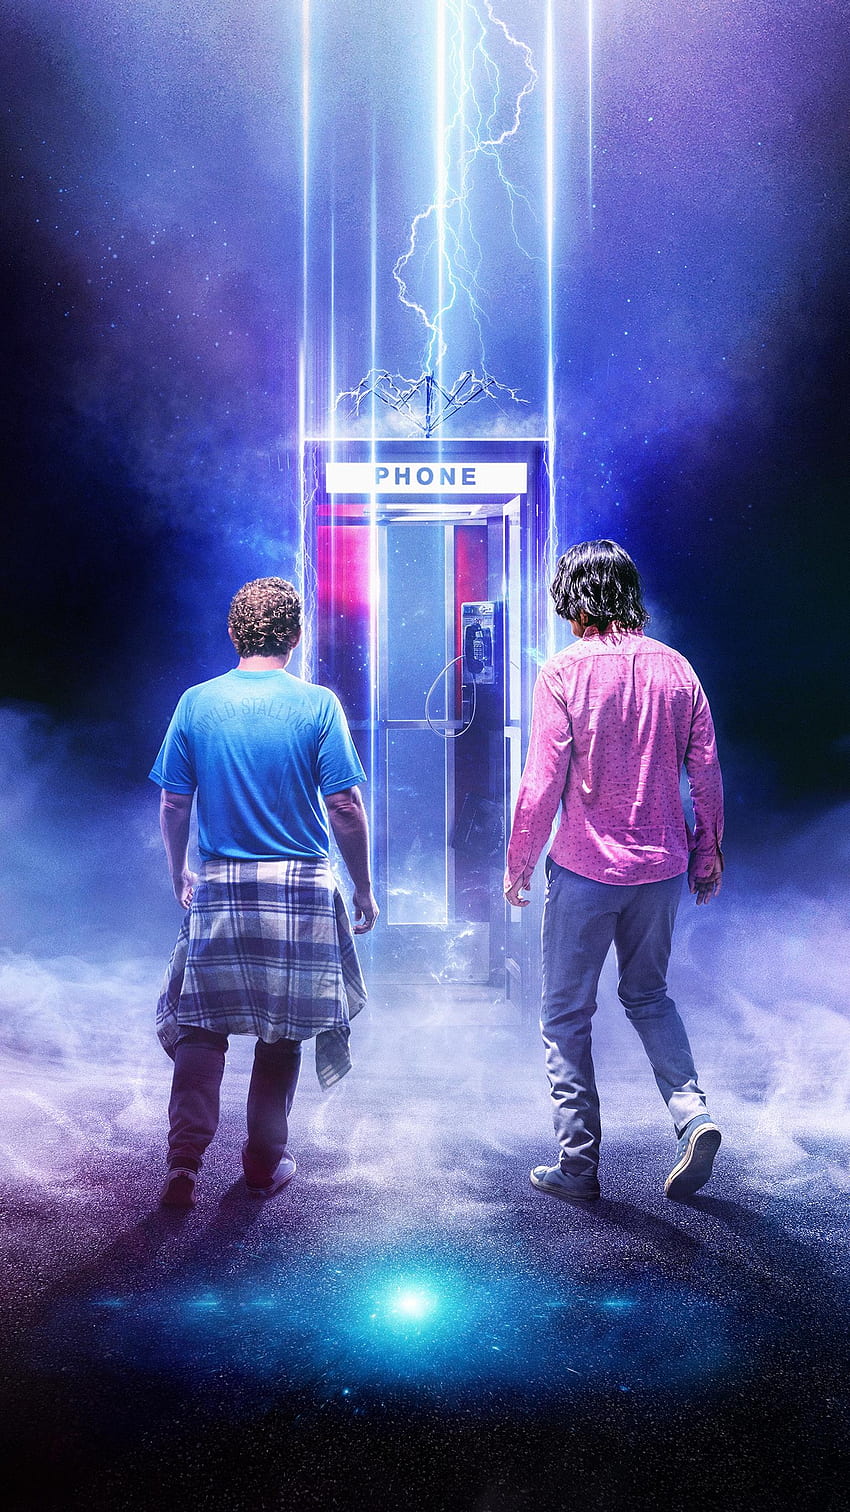 Bill & Ted Face the Music (2022) movie HD phone wallpaper